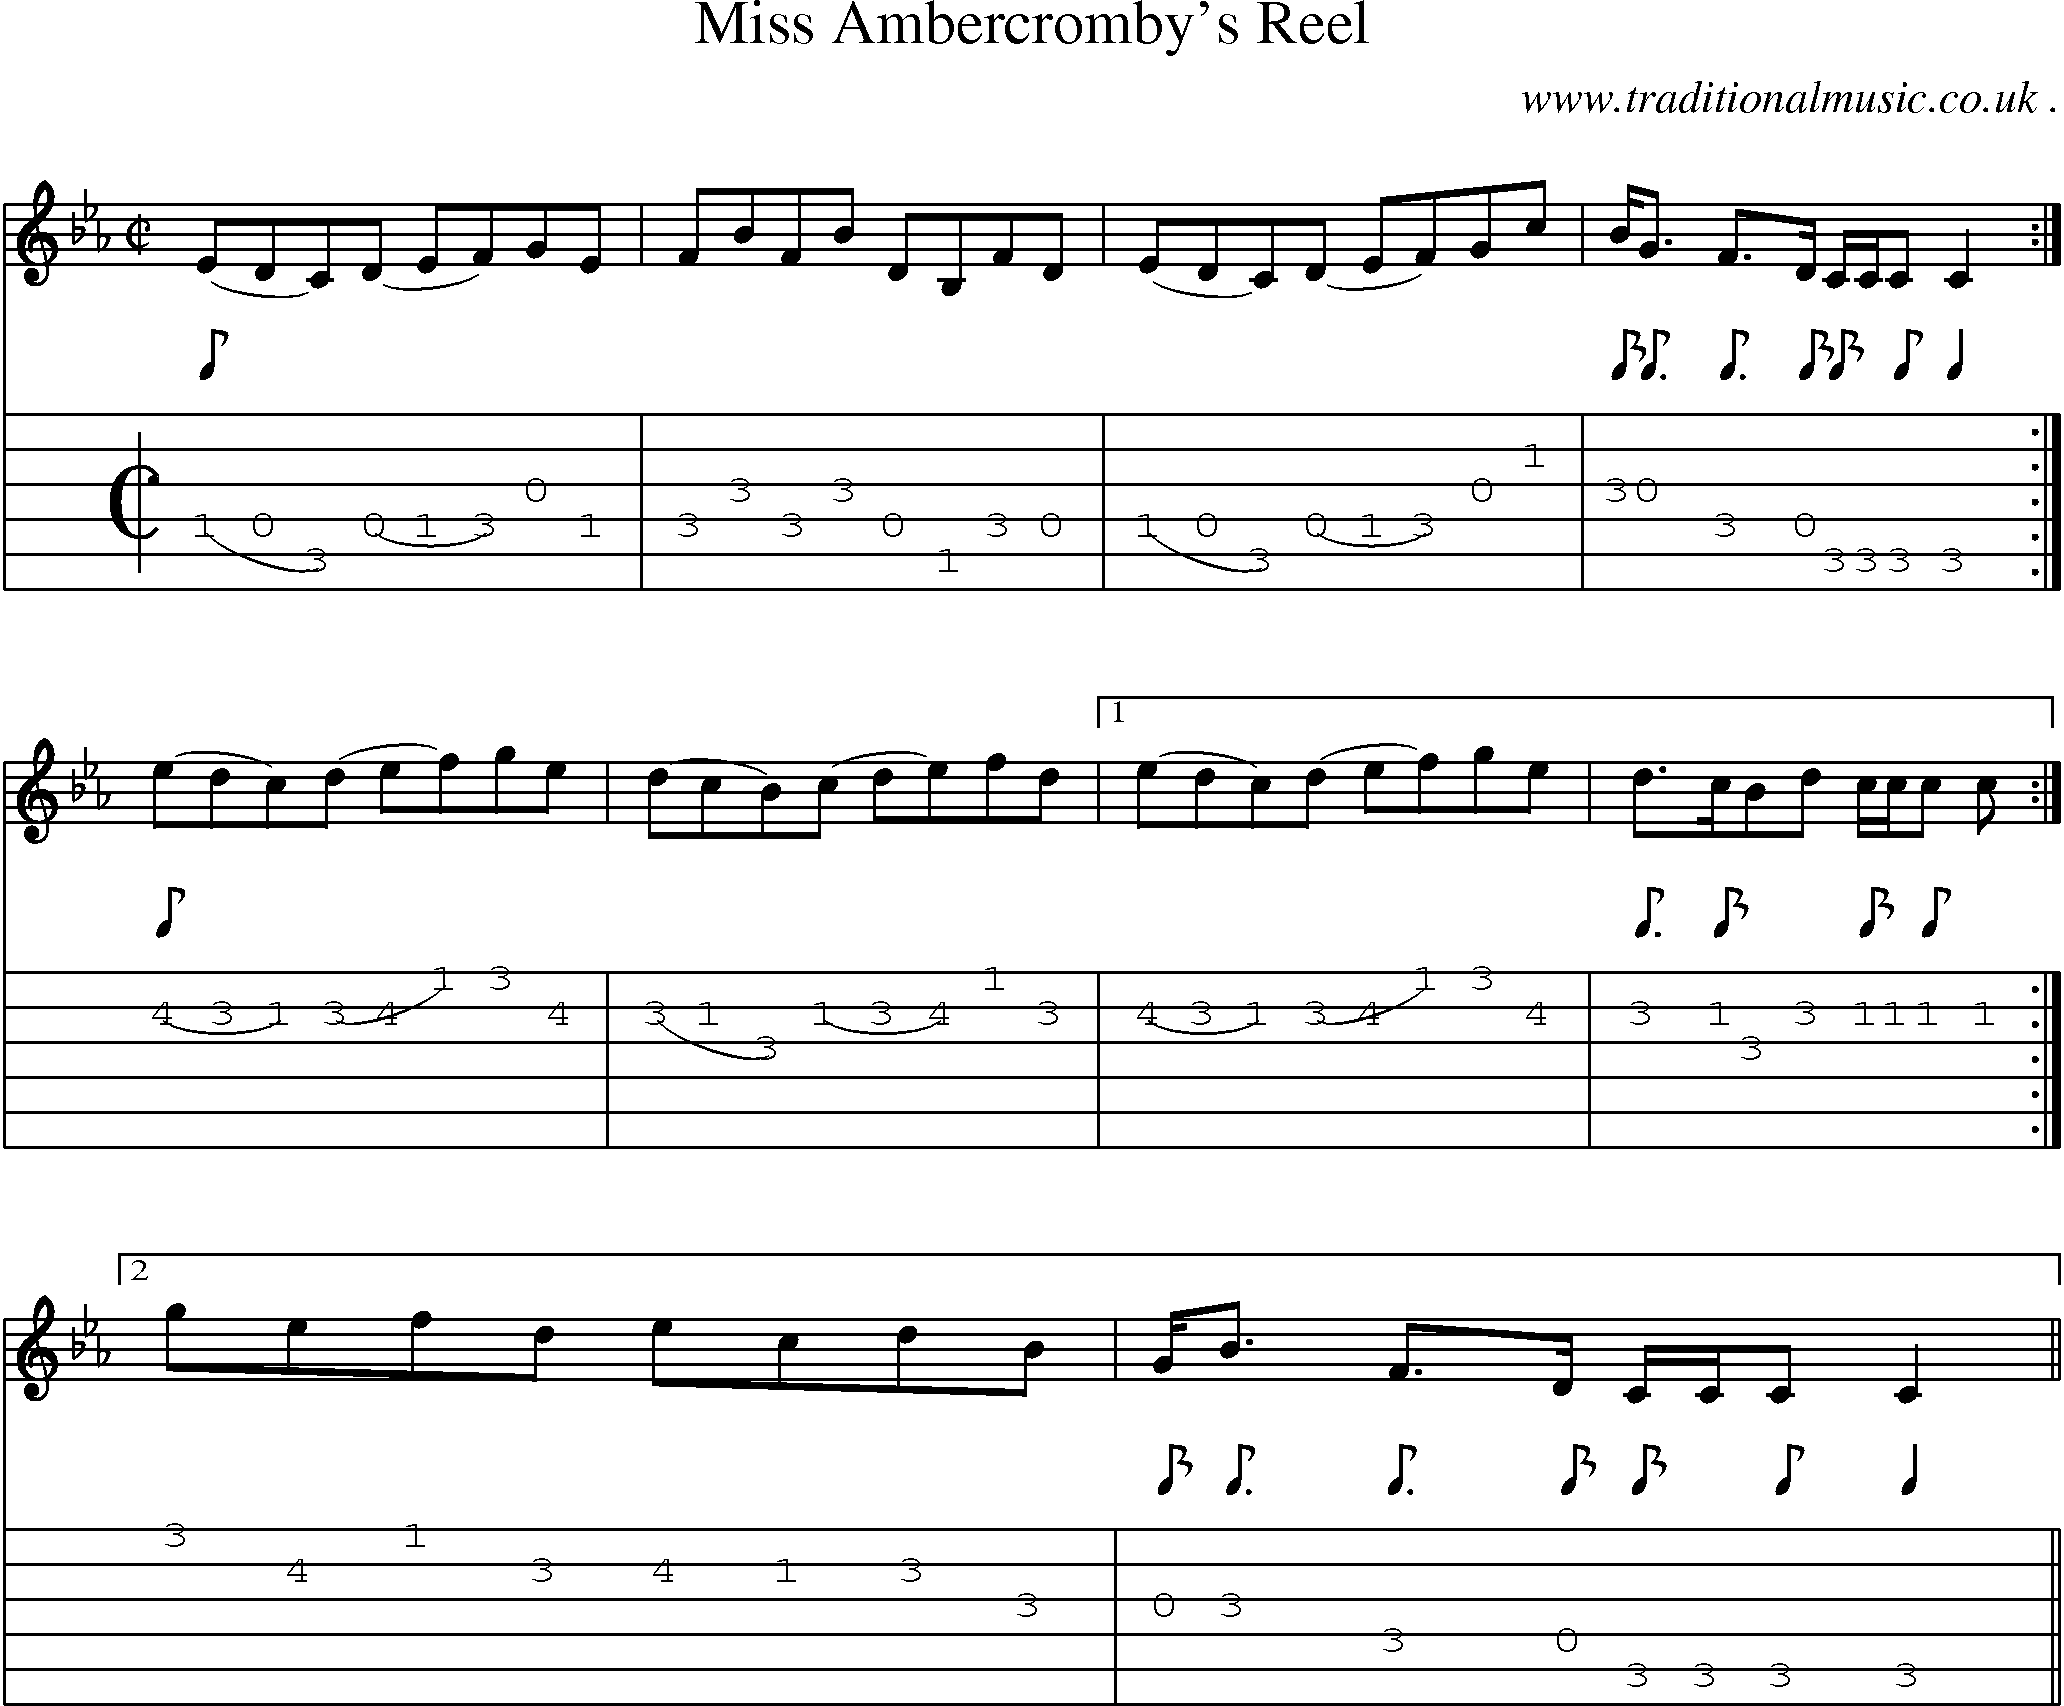 Sheet-music  score, Chords and Guitar Tabs for Miss Ambercrombys Reel